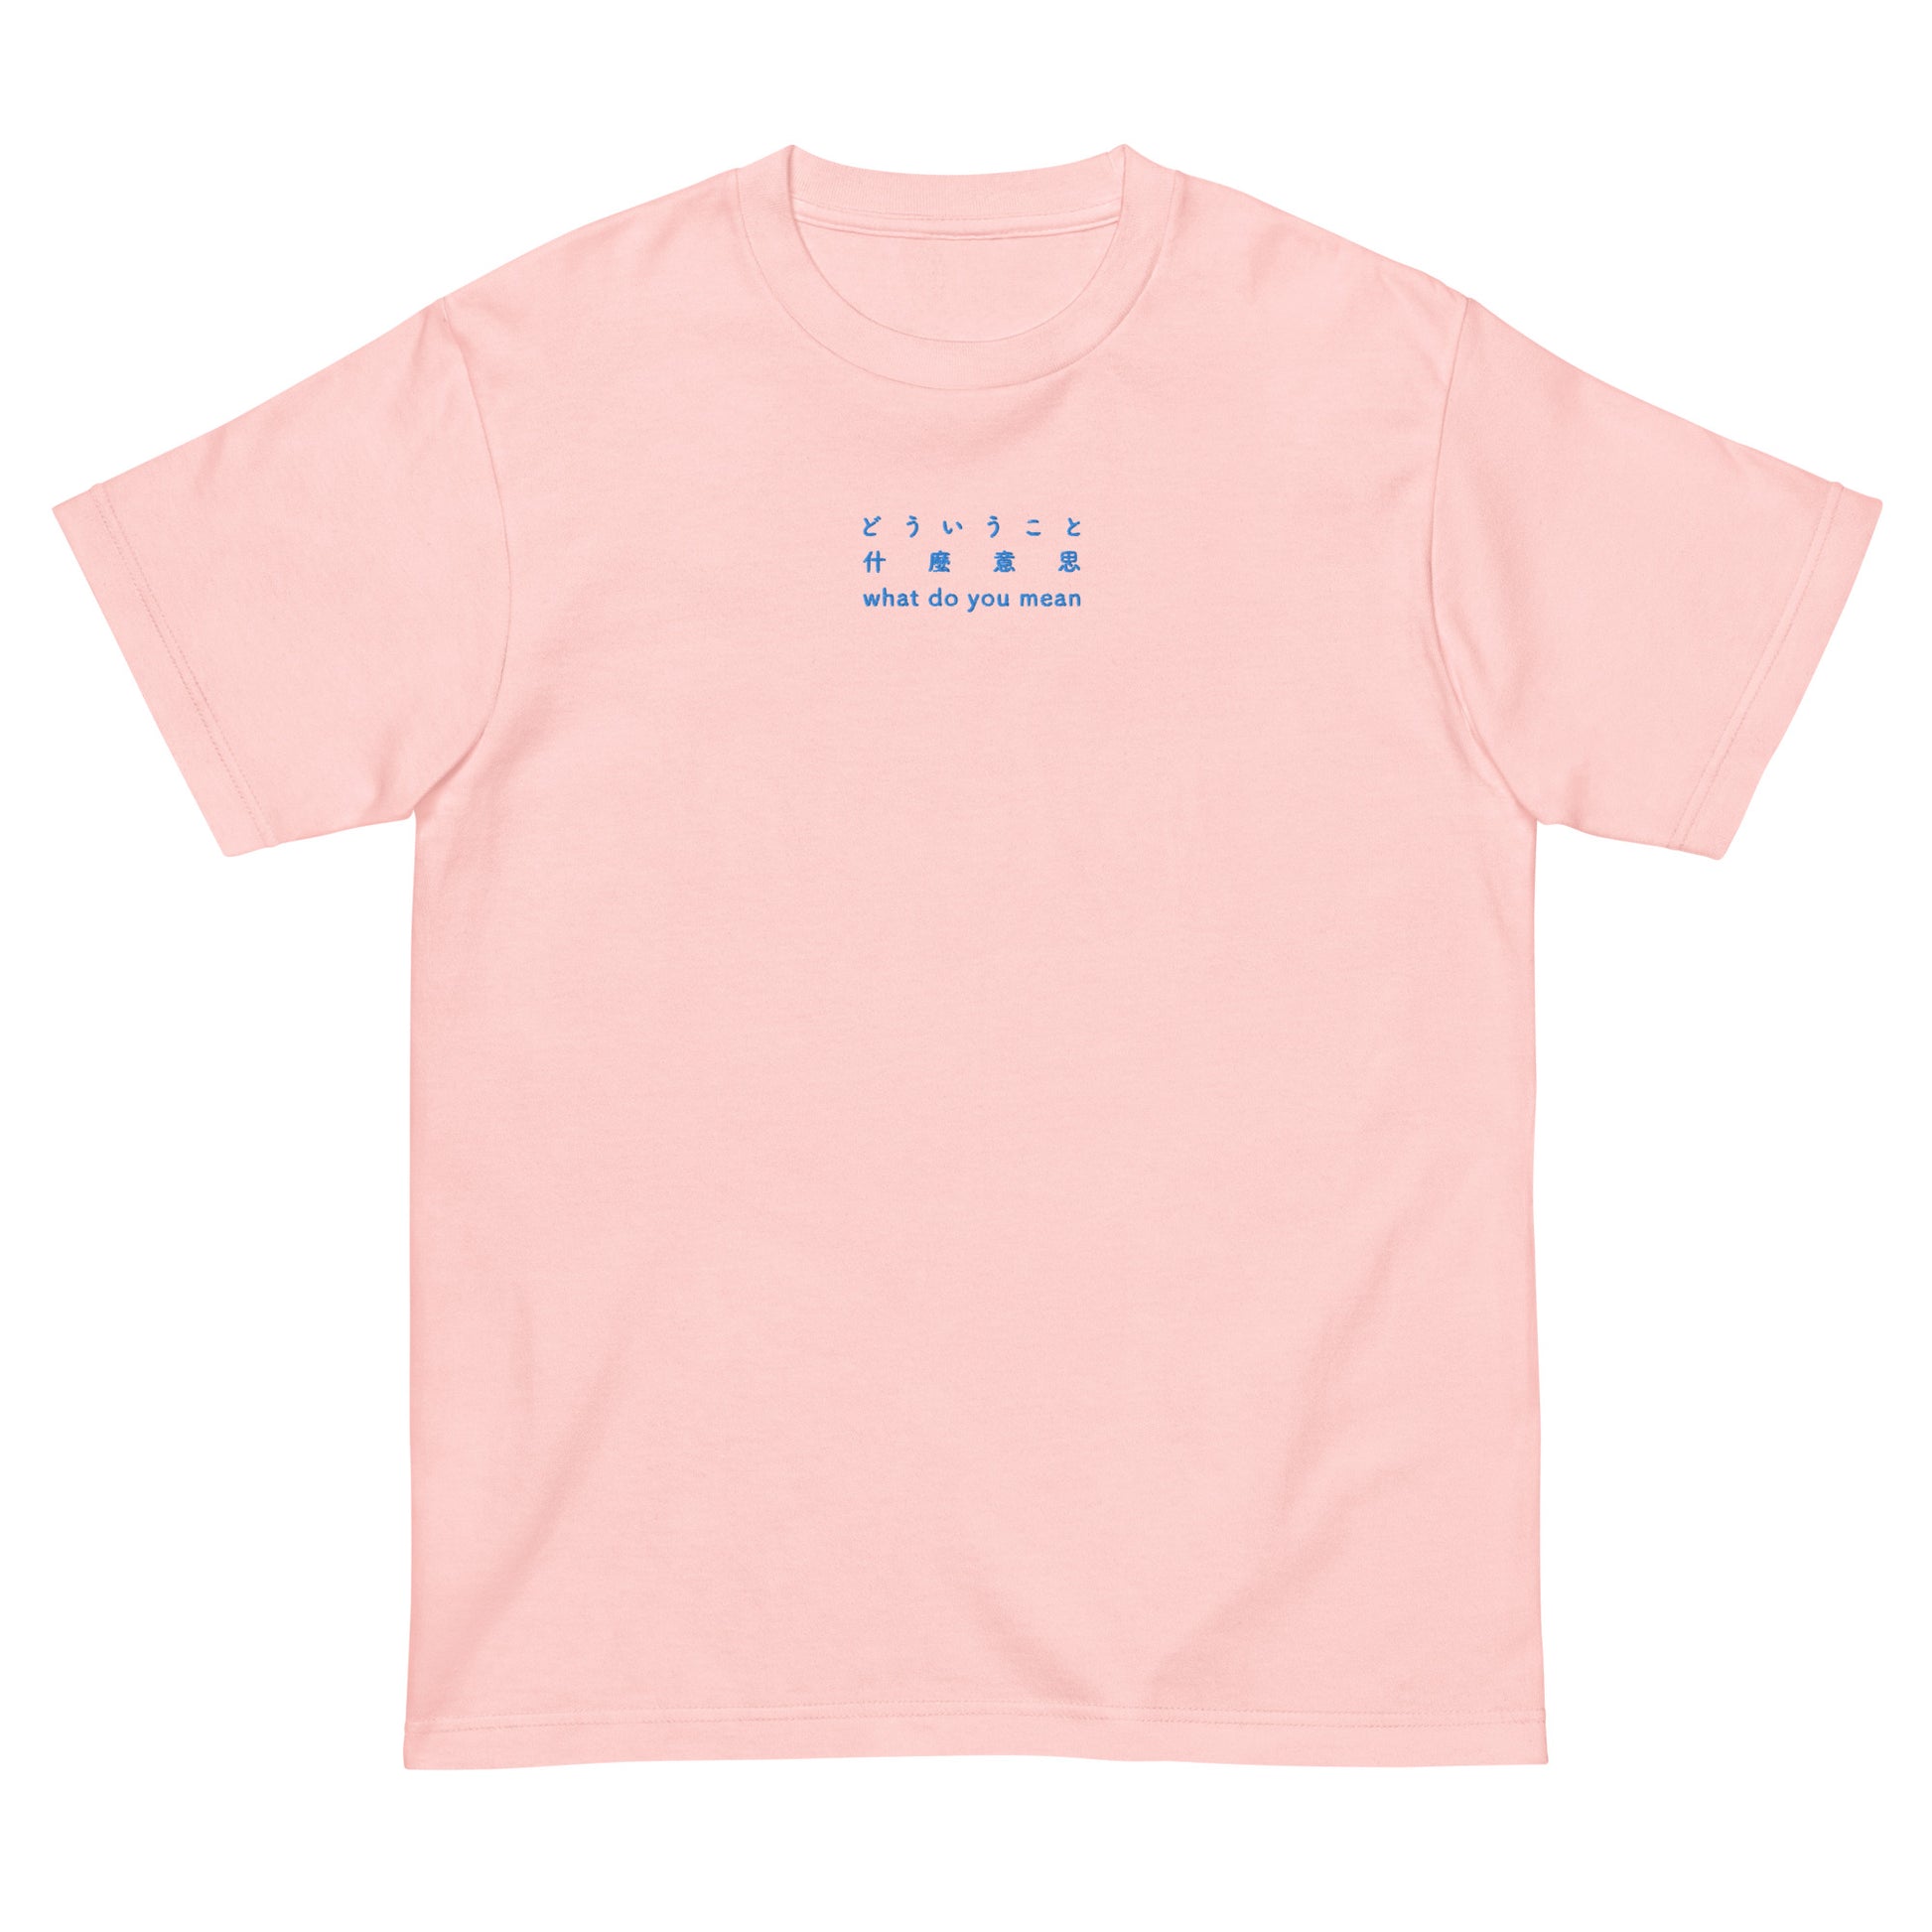 Pink High Quality Tee - Front Design with an Blue Embroidery "What Do You Mean" in Japanese, Chinese and English